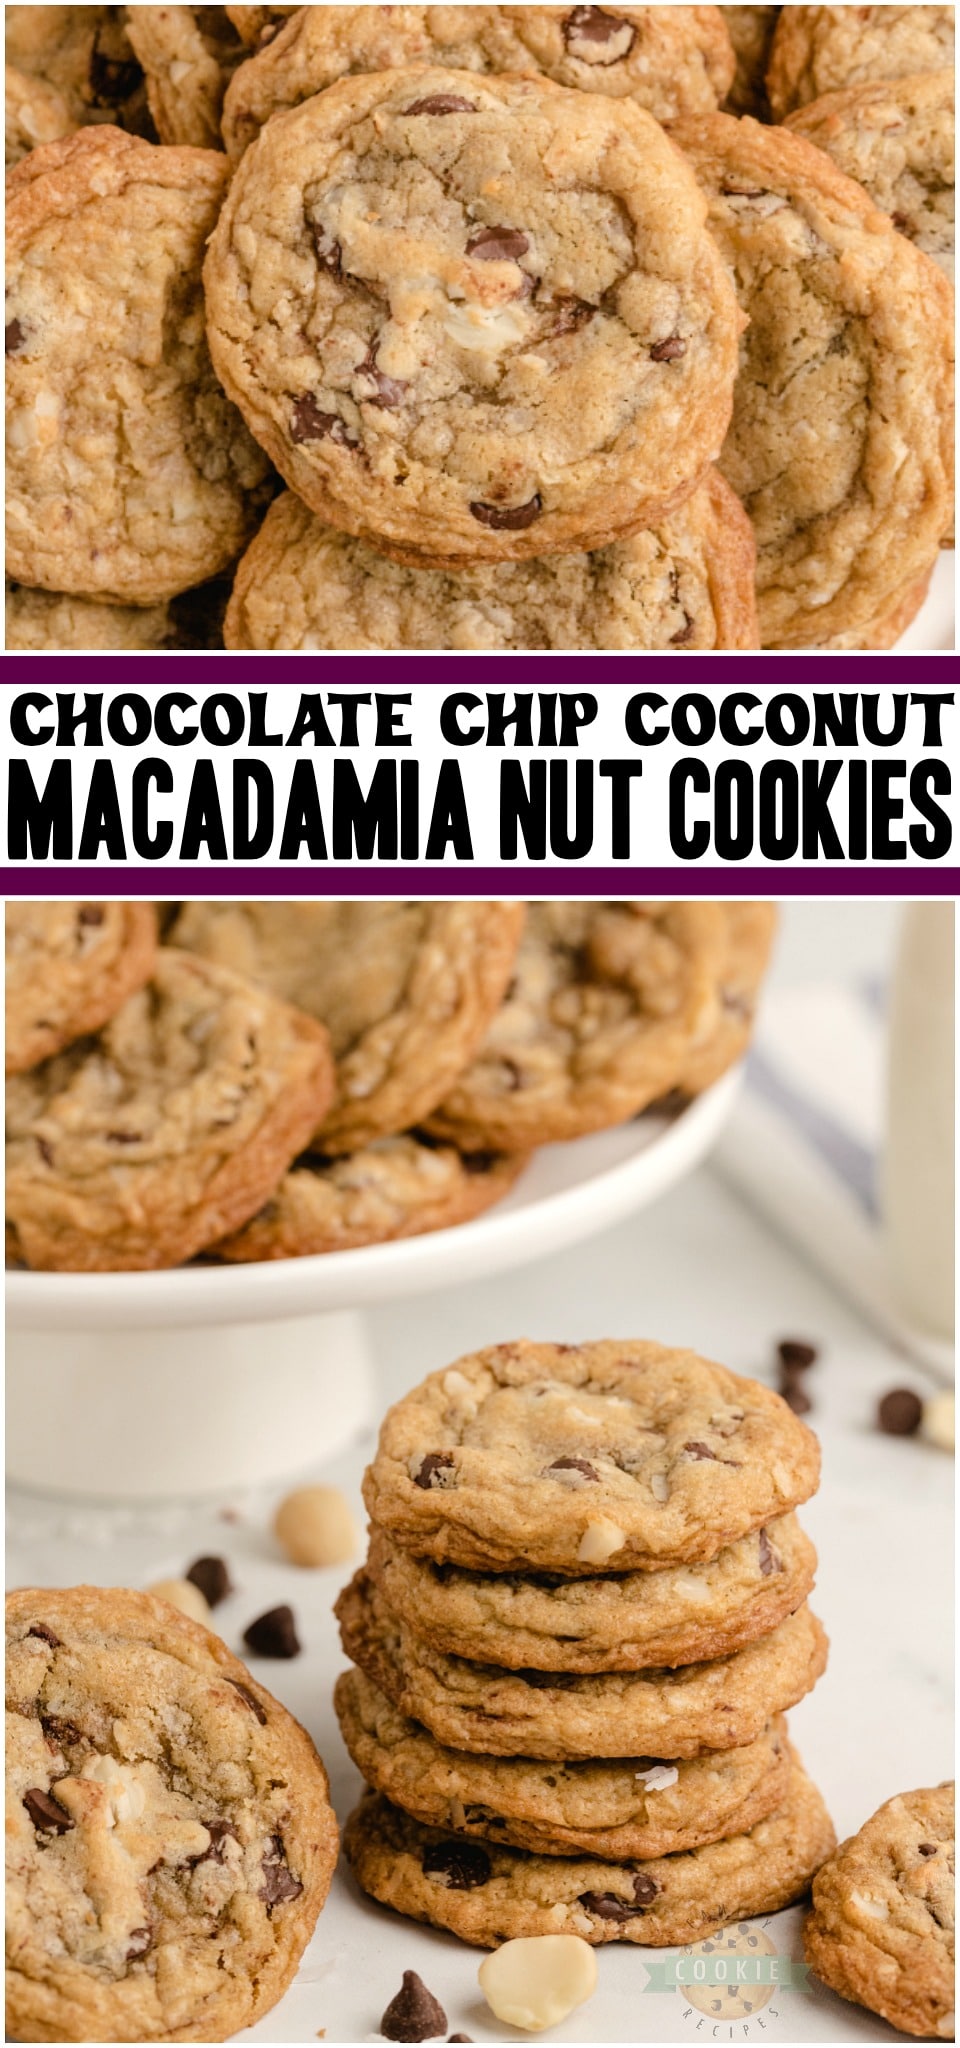 Chocolate chip macadamia nut cookies are soft & chewy cookies loaded with sweet chocolate and nuts! These Coconut Macadamia Nut Cookies are perfect for chocolate chip lovers who want to try something a bit different. #chocolatechip #coconut #macadamianut #cookies #baking #dessert #chocolatecoconut #recipe from FAMILY COOKIE RECIPES via @buttergirls